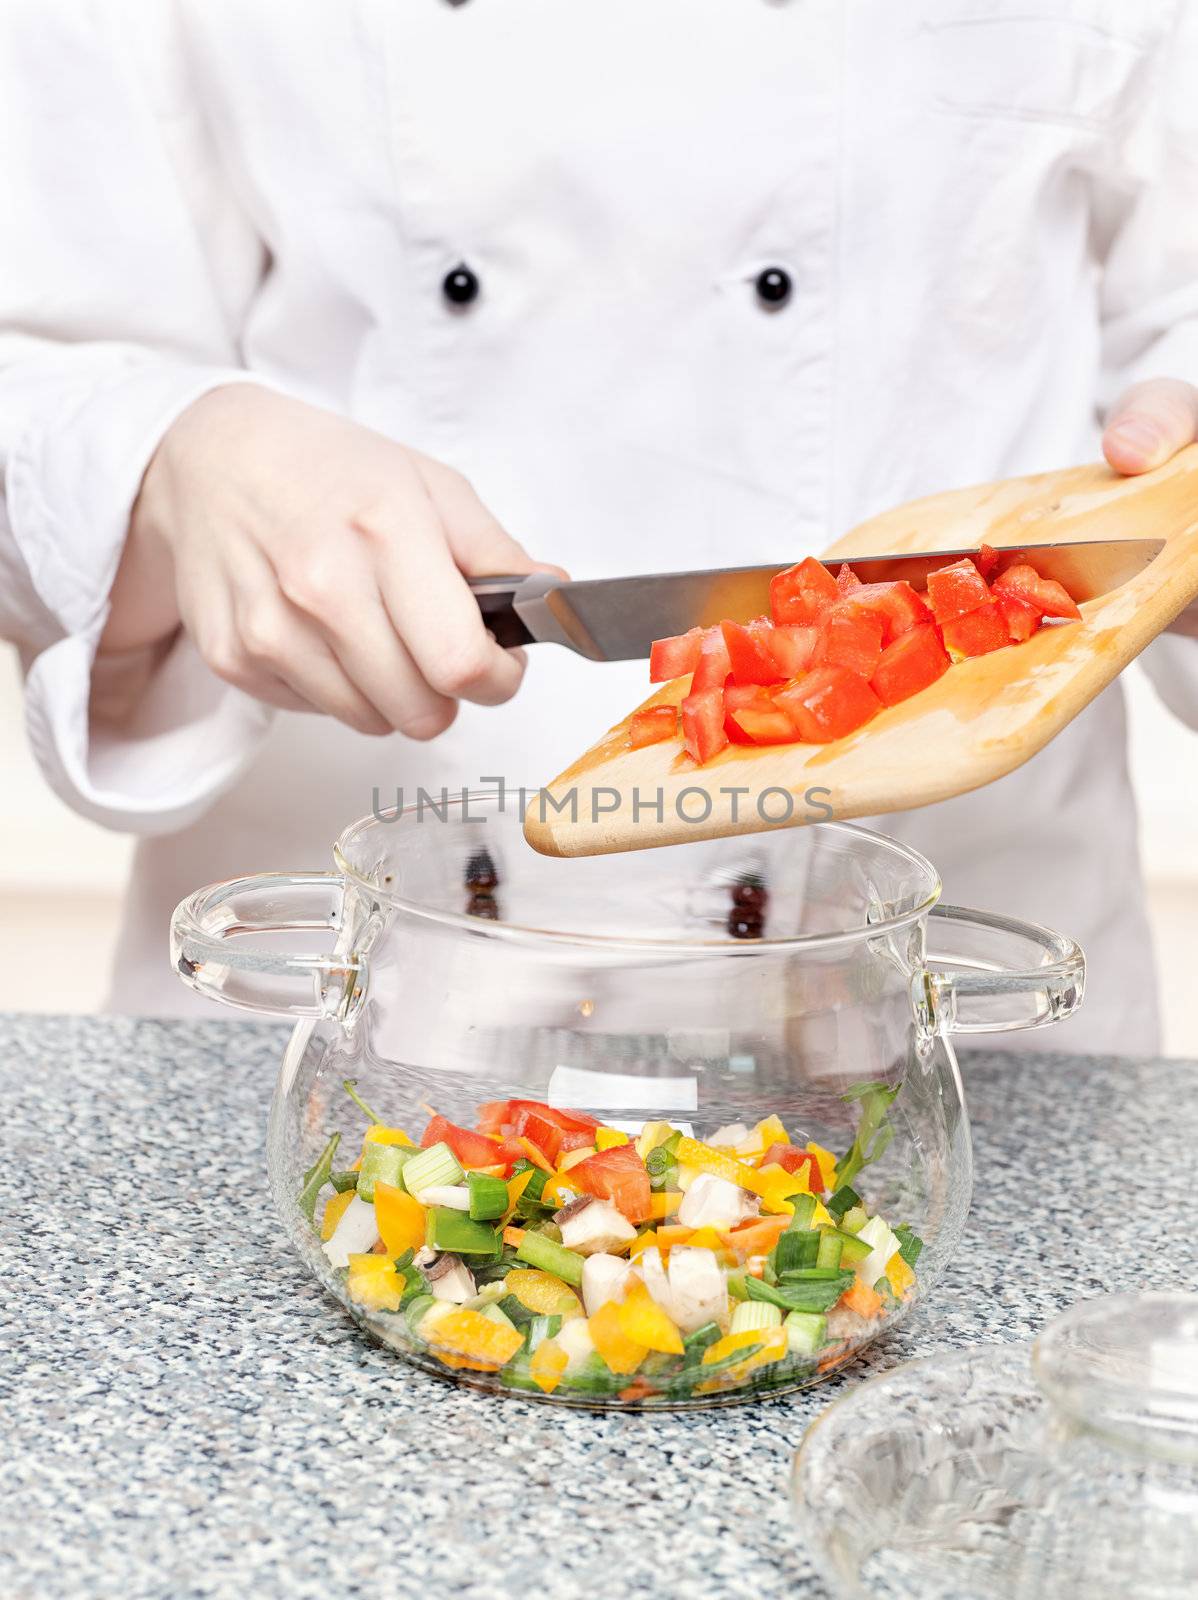 chef adds chopped tomatoes in a glass bowl with other vegetables